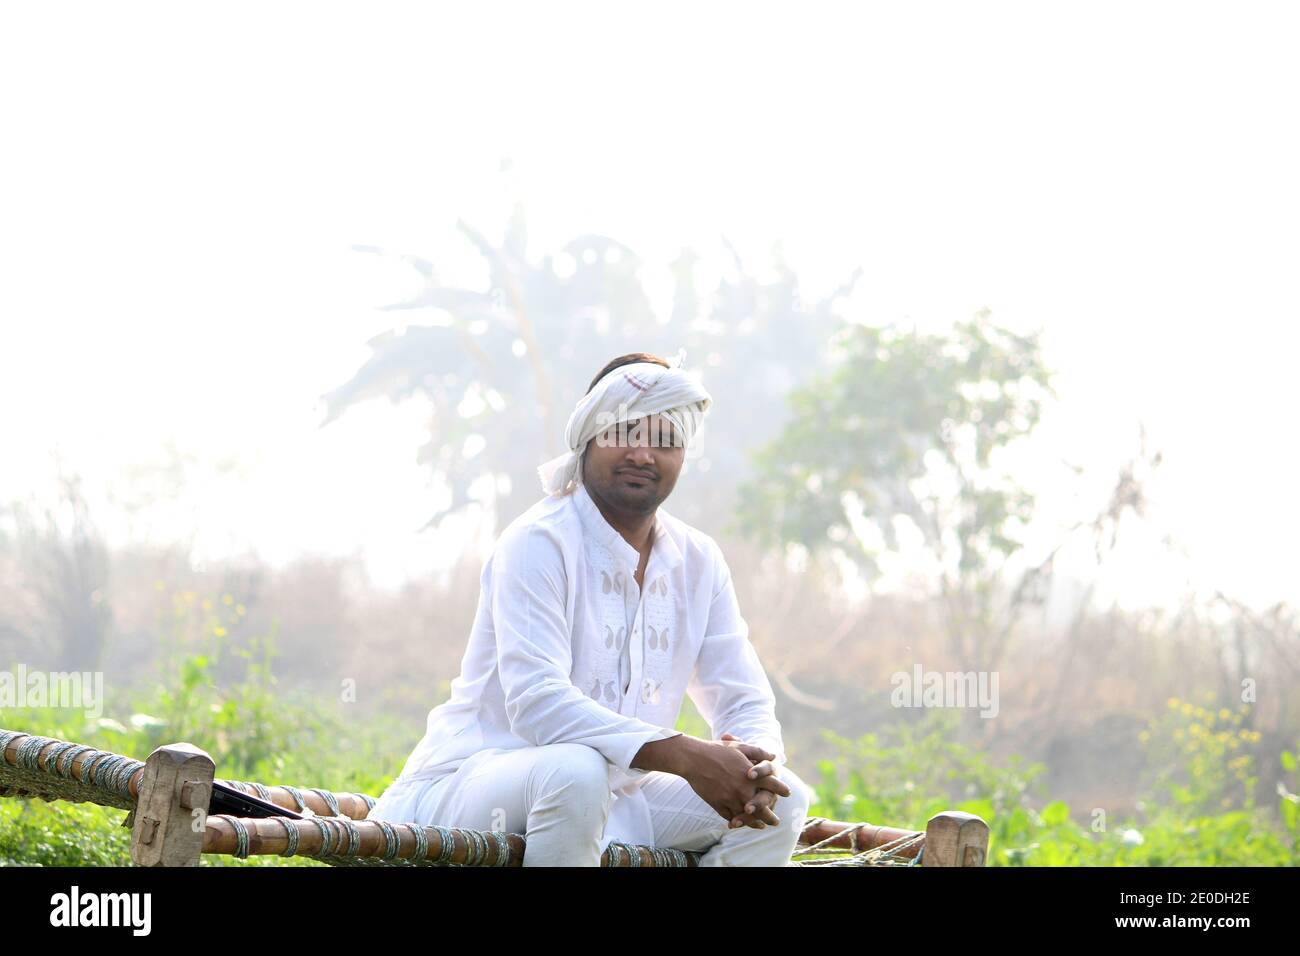 Relaxing In Nature,indian farmer Stock Photo